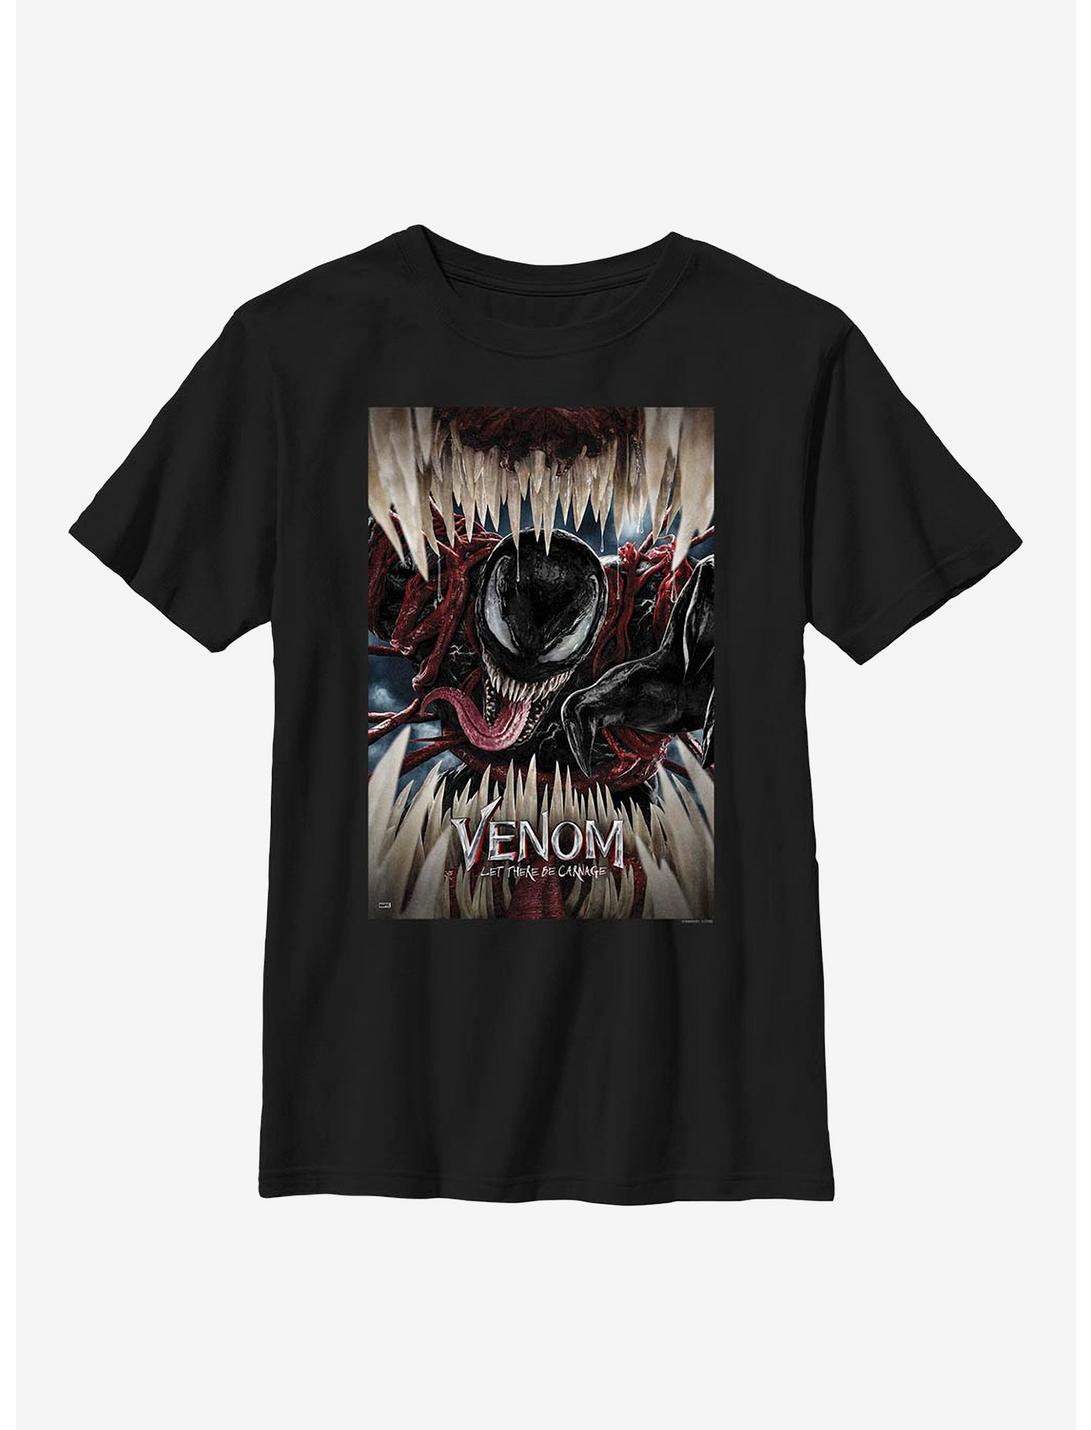 Marvel Venom: Let There Be Carnage Poster Youth T-Shirt, BLACK, hi-res